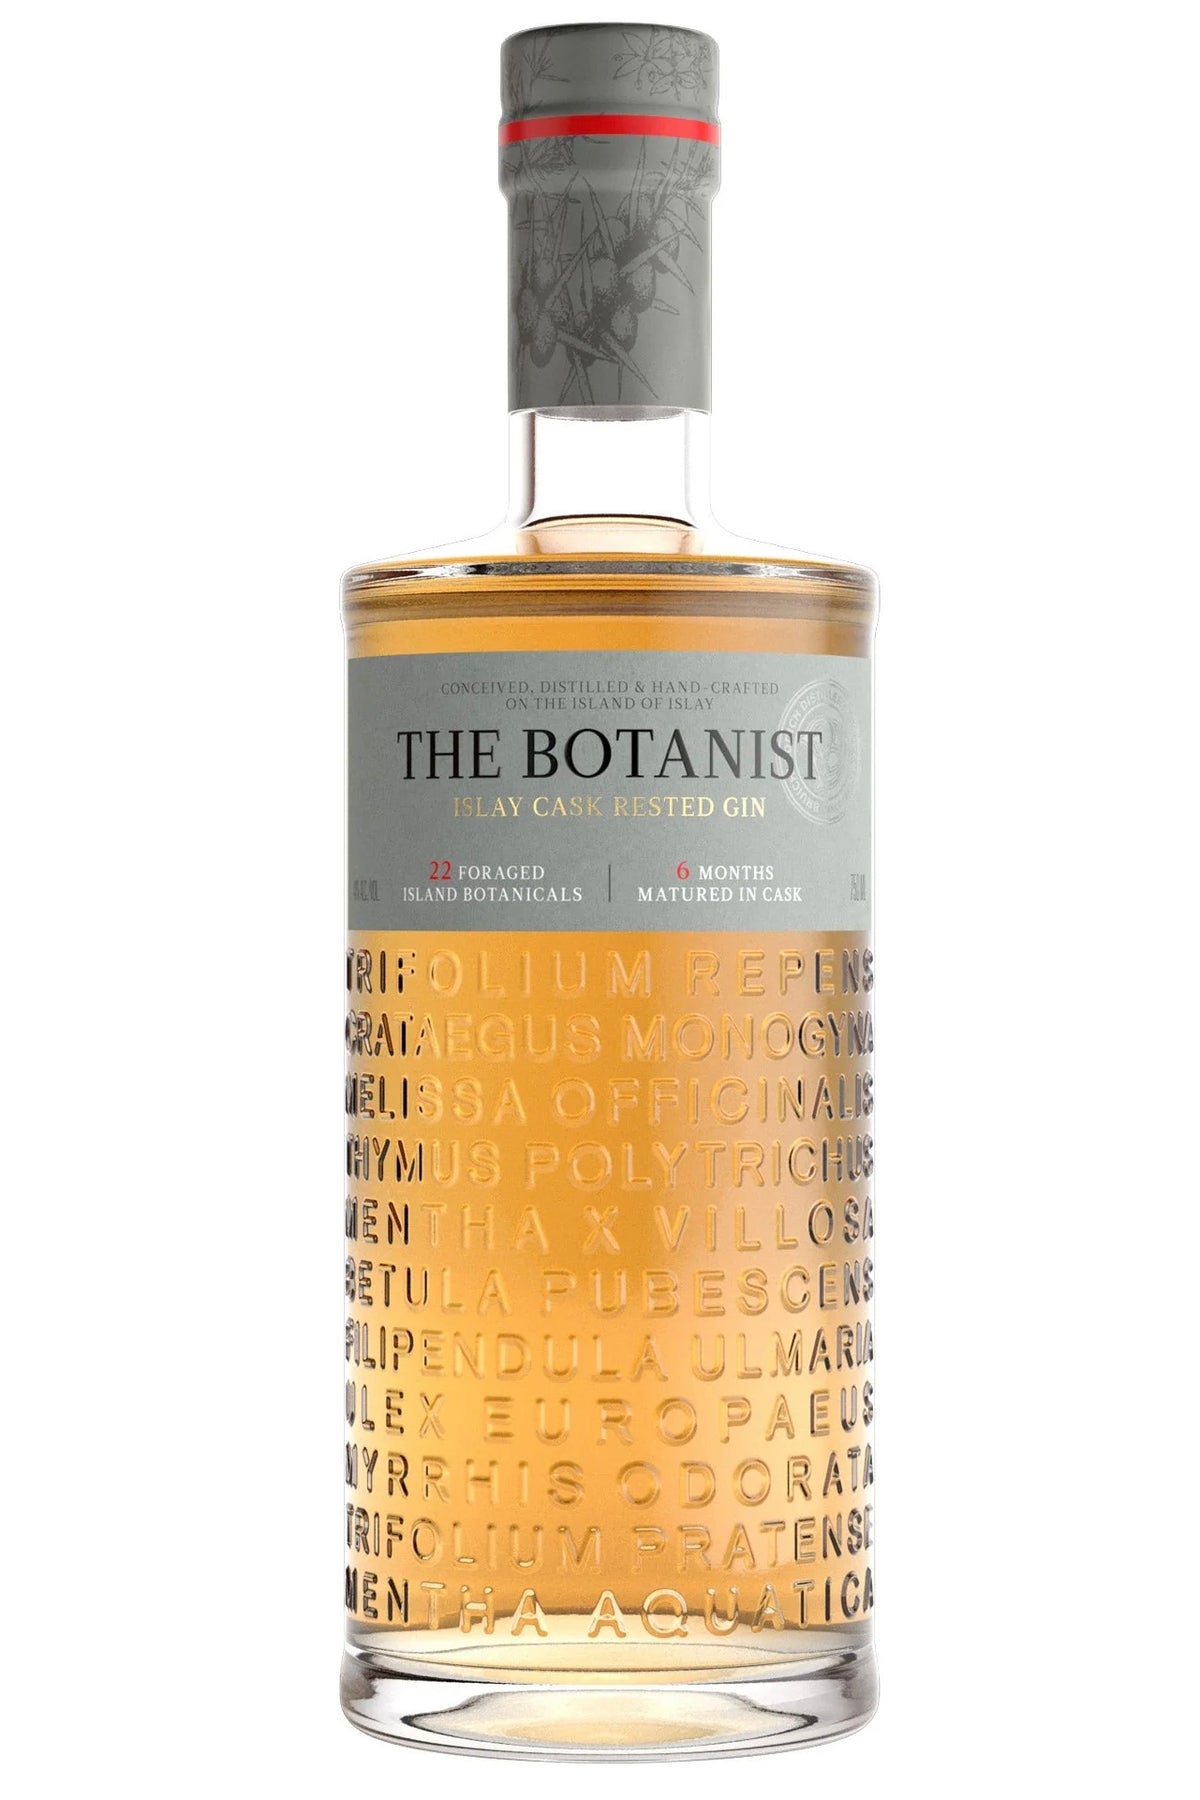 The Botanist Cask Rested Islay Gin